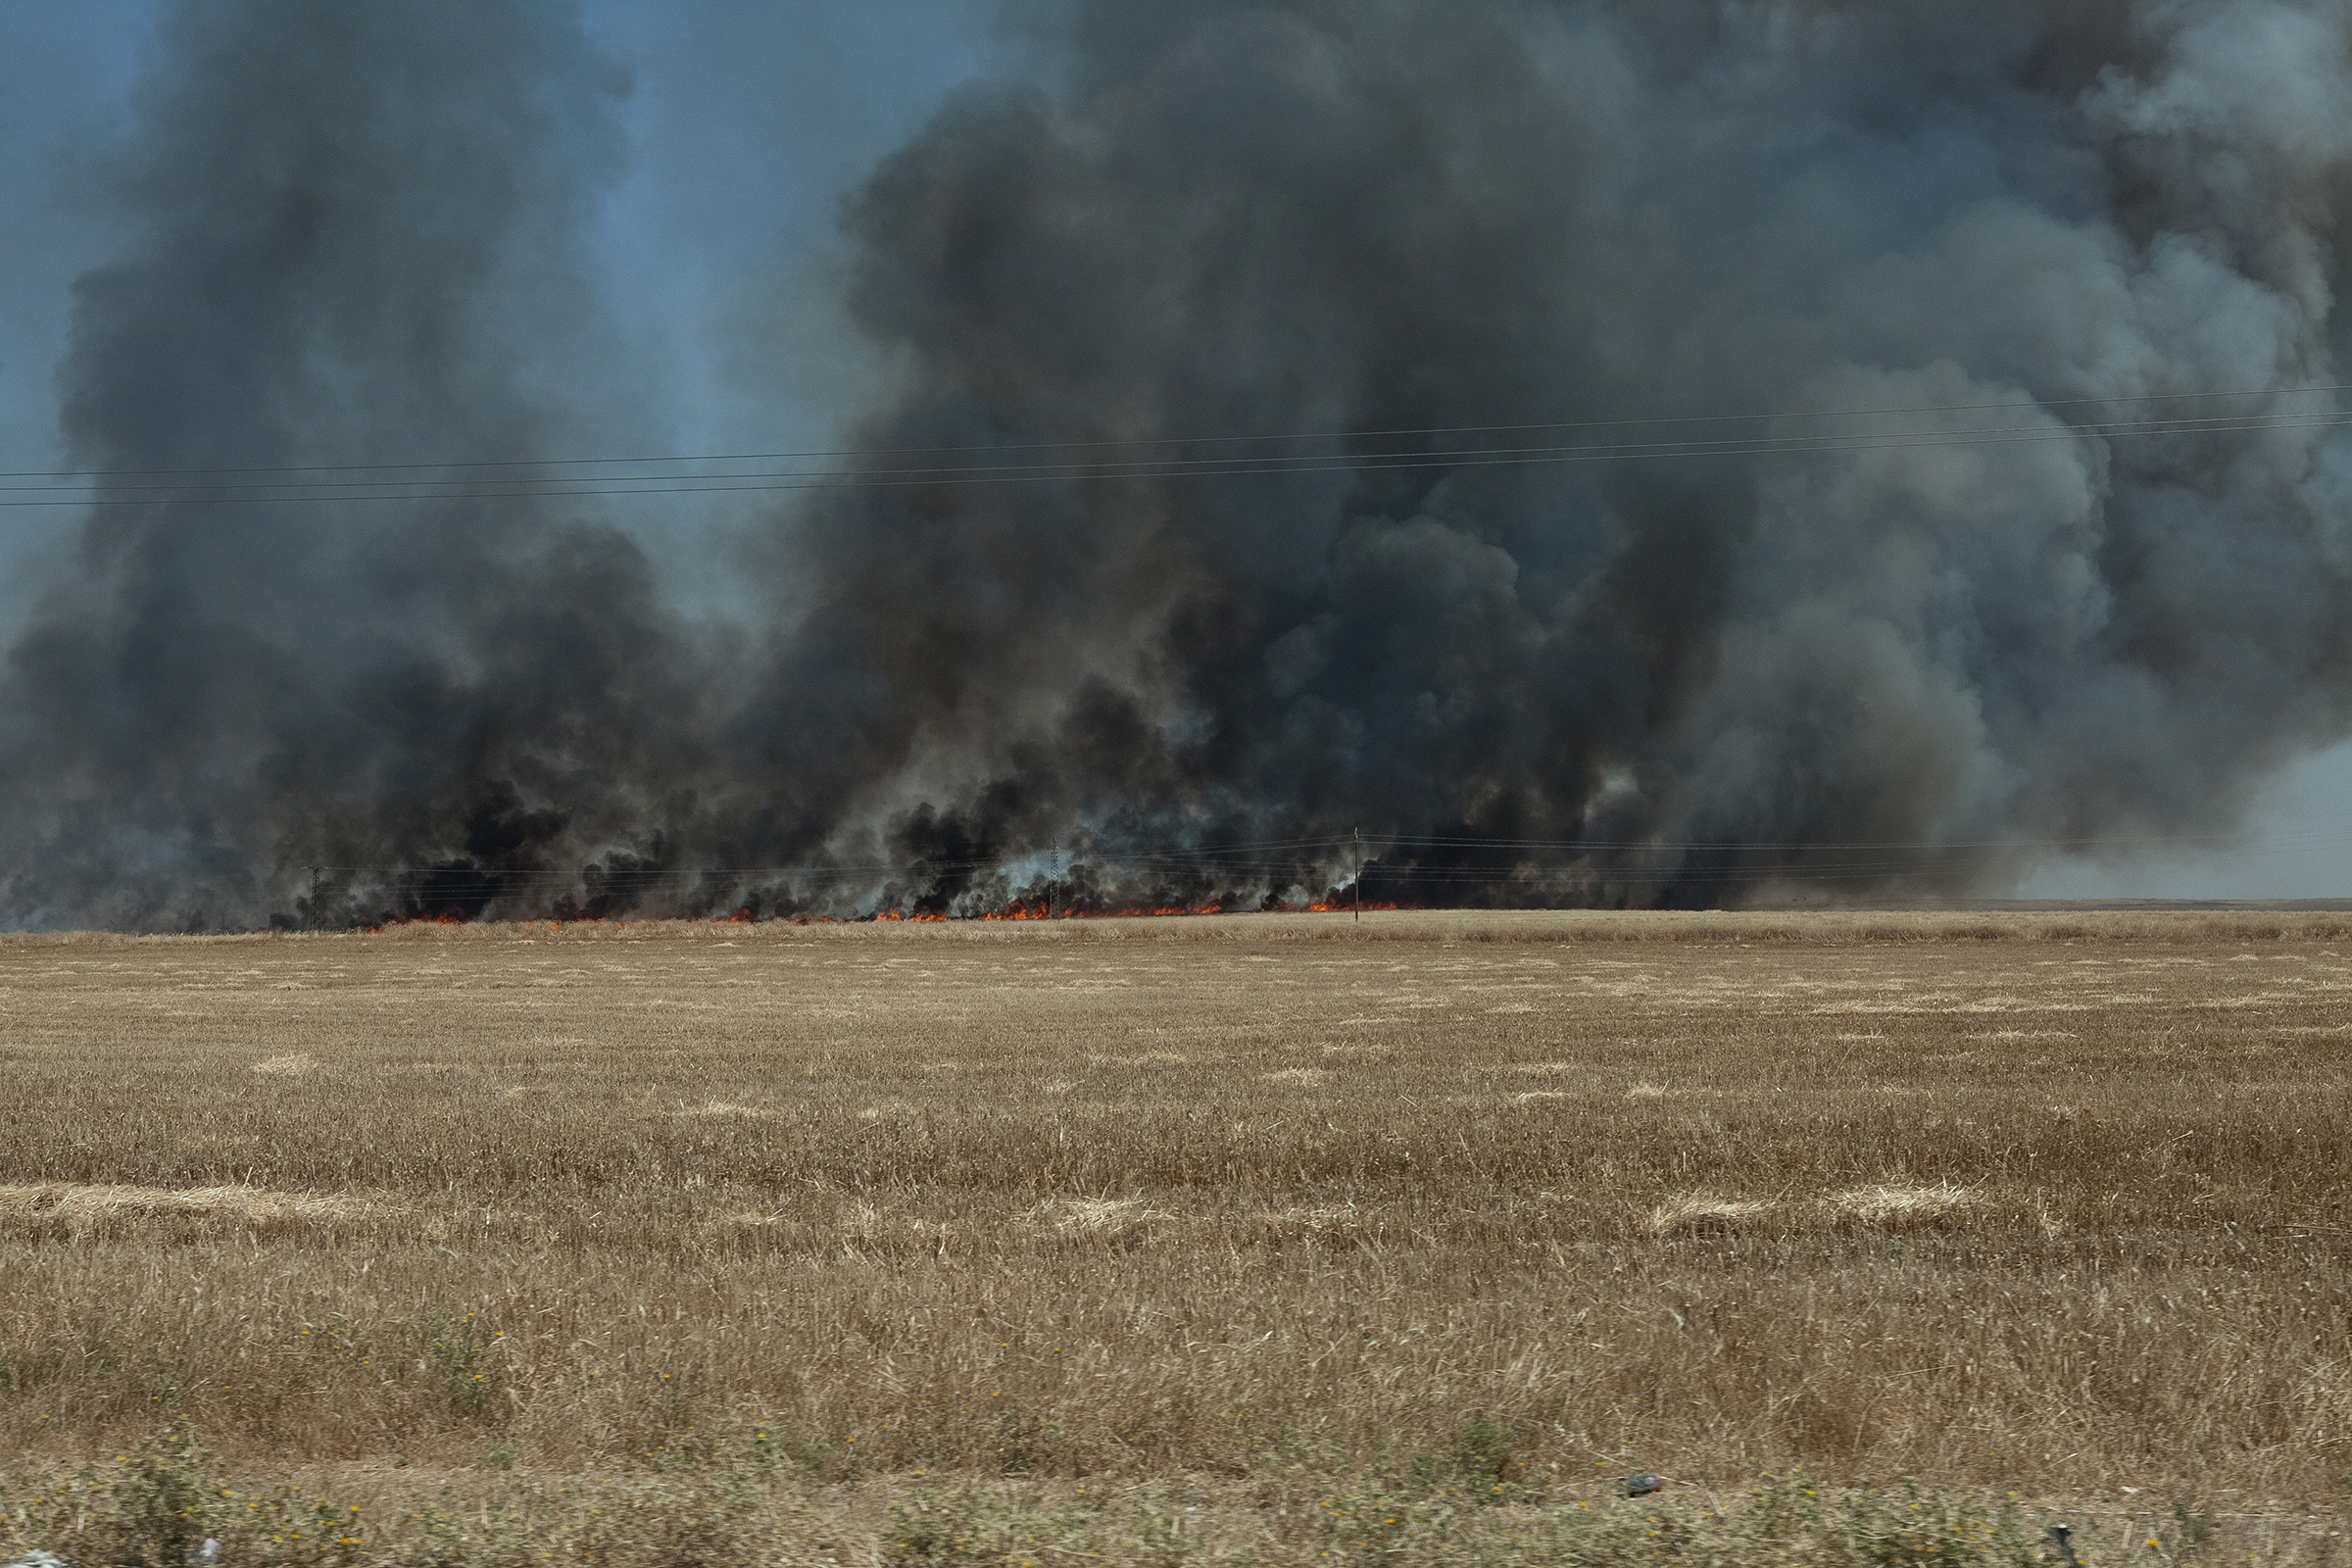 A field burns on the road between Al-Maabadah and Qamishli in June 2019. The dominating rumor among the Kurdish population was the fires were set by ISIS sleeper cells. (Olga Kravets—NOOR/Redux)